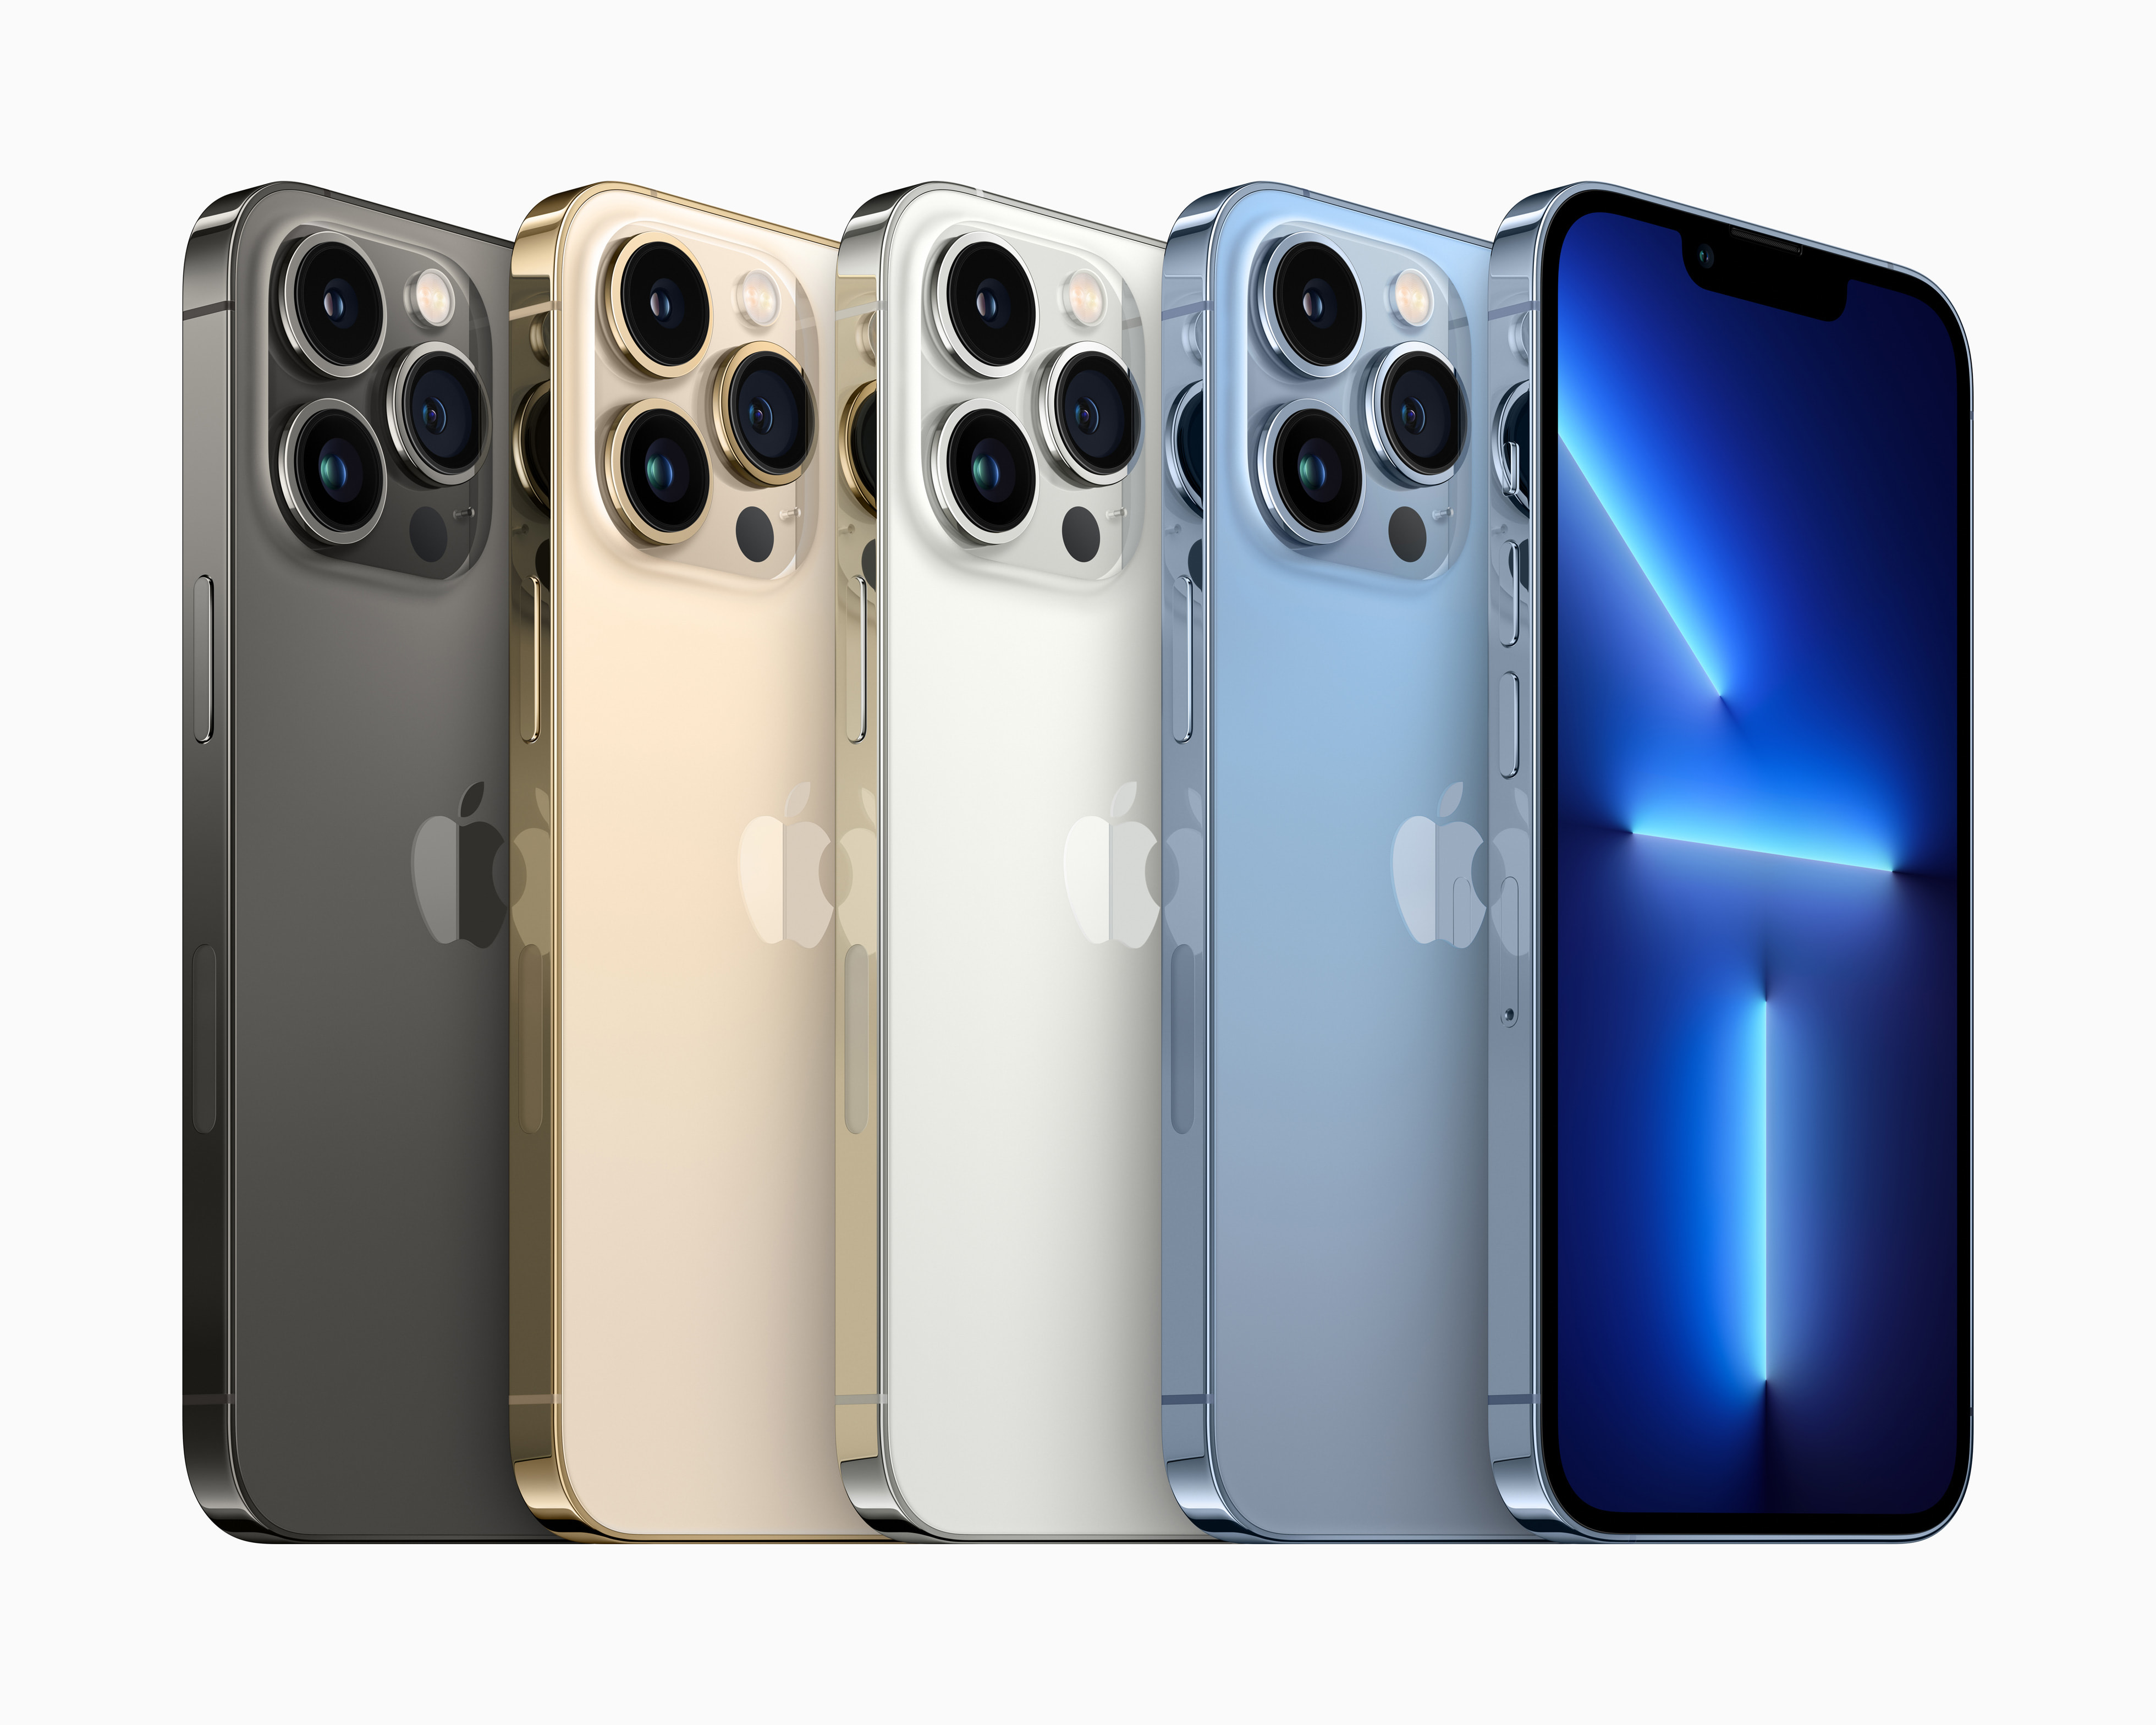 Apple iphone 13 pro max release date